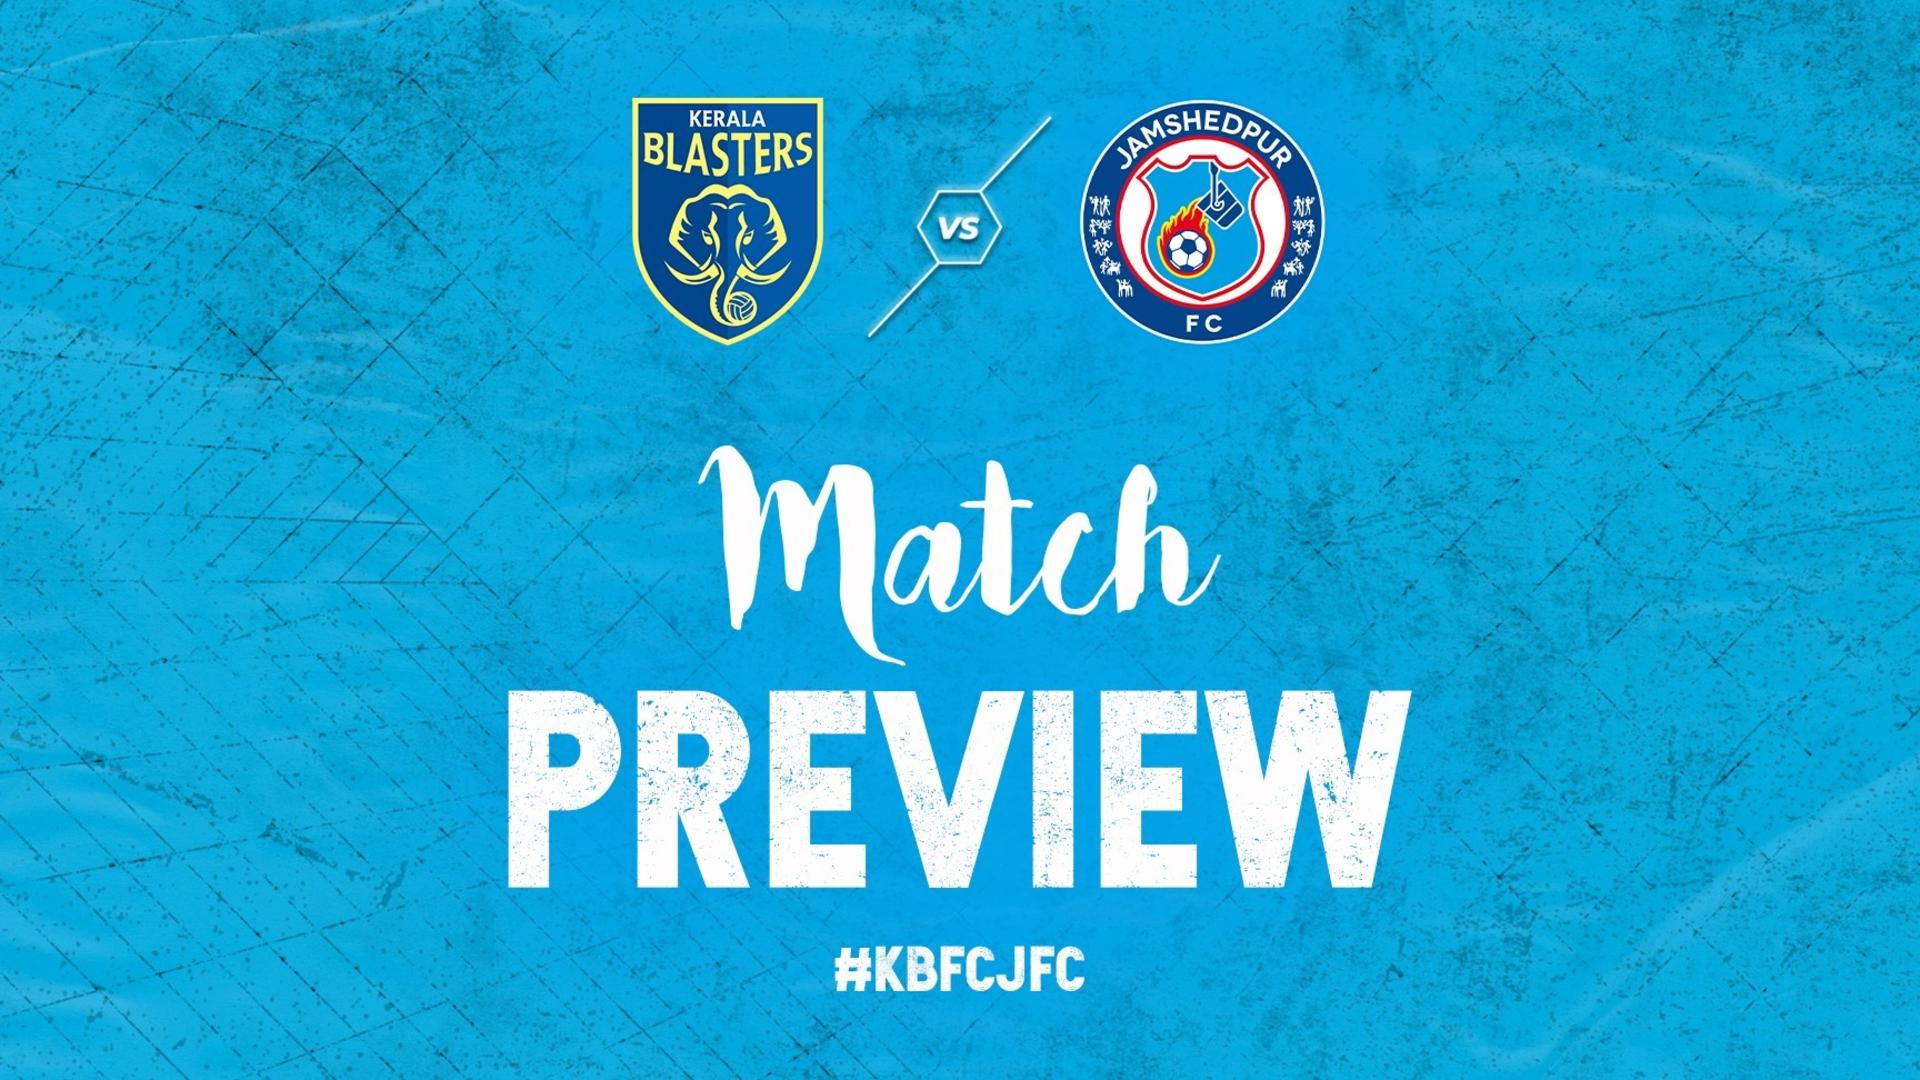 The Men Of Steel Face Kerala Blasters In Their First Clash Of 2023 -  Jamshedpur Football Club